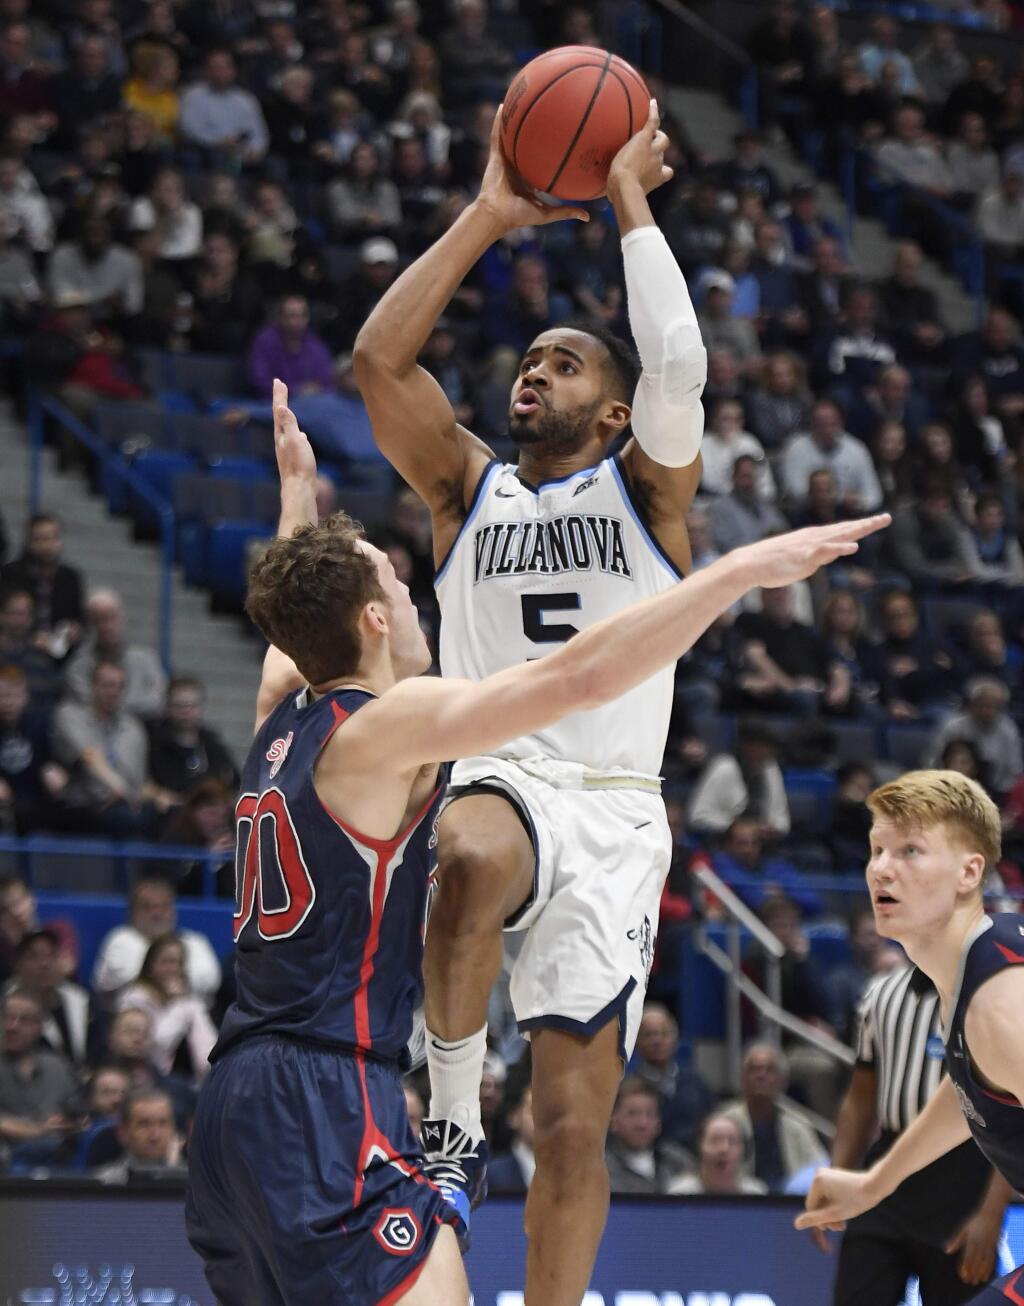 Villanova's Phil Booth (5) shoots over St. Mary's Tanner Krebs (0) during the first half of a first round men's college basketball game in the NCAA tournament, Thursday, March 21, 2019, in Hartford, Conn. (AP Photo/Jessica Hill)